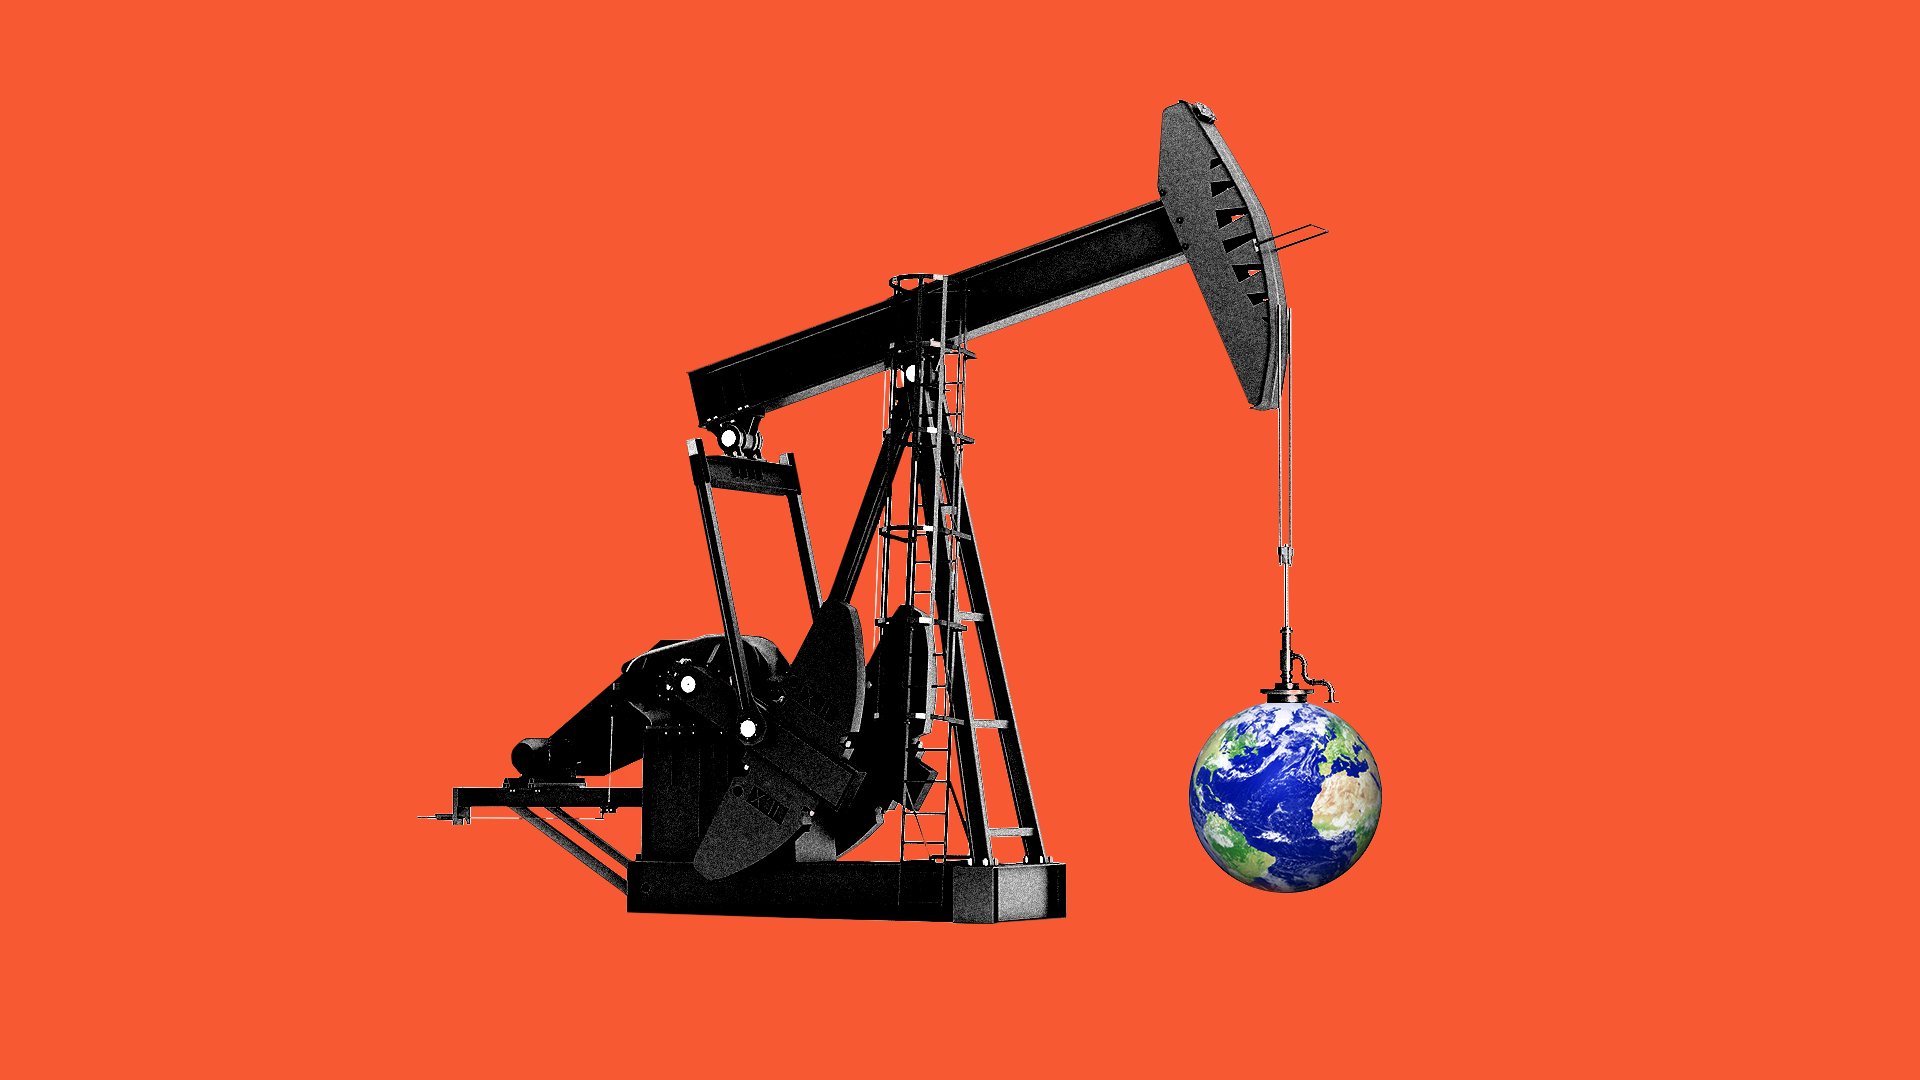 An illustration of a pumpjack lifting planet Earth.